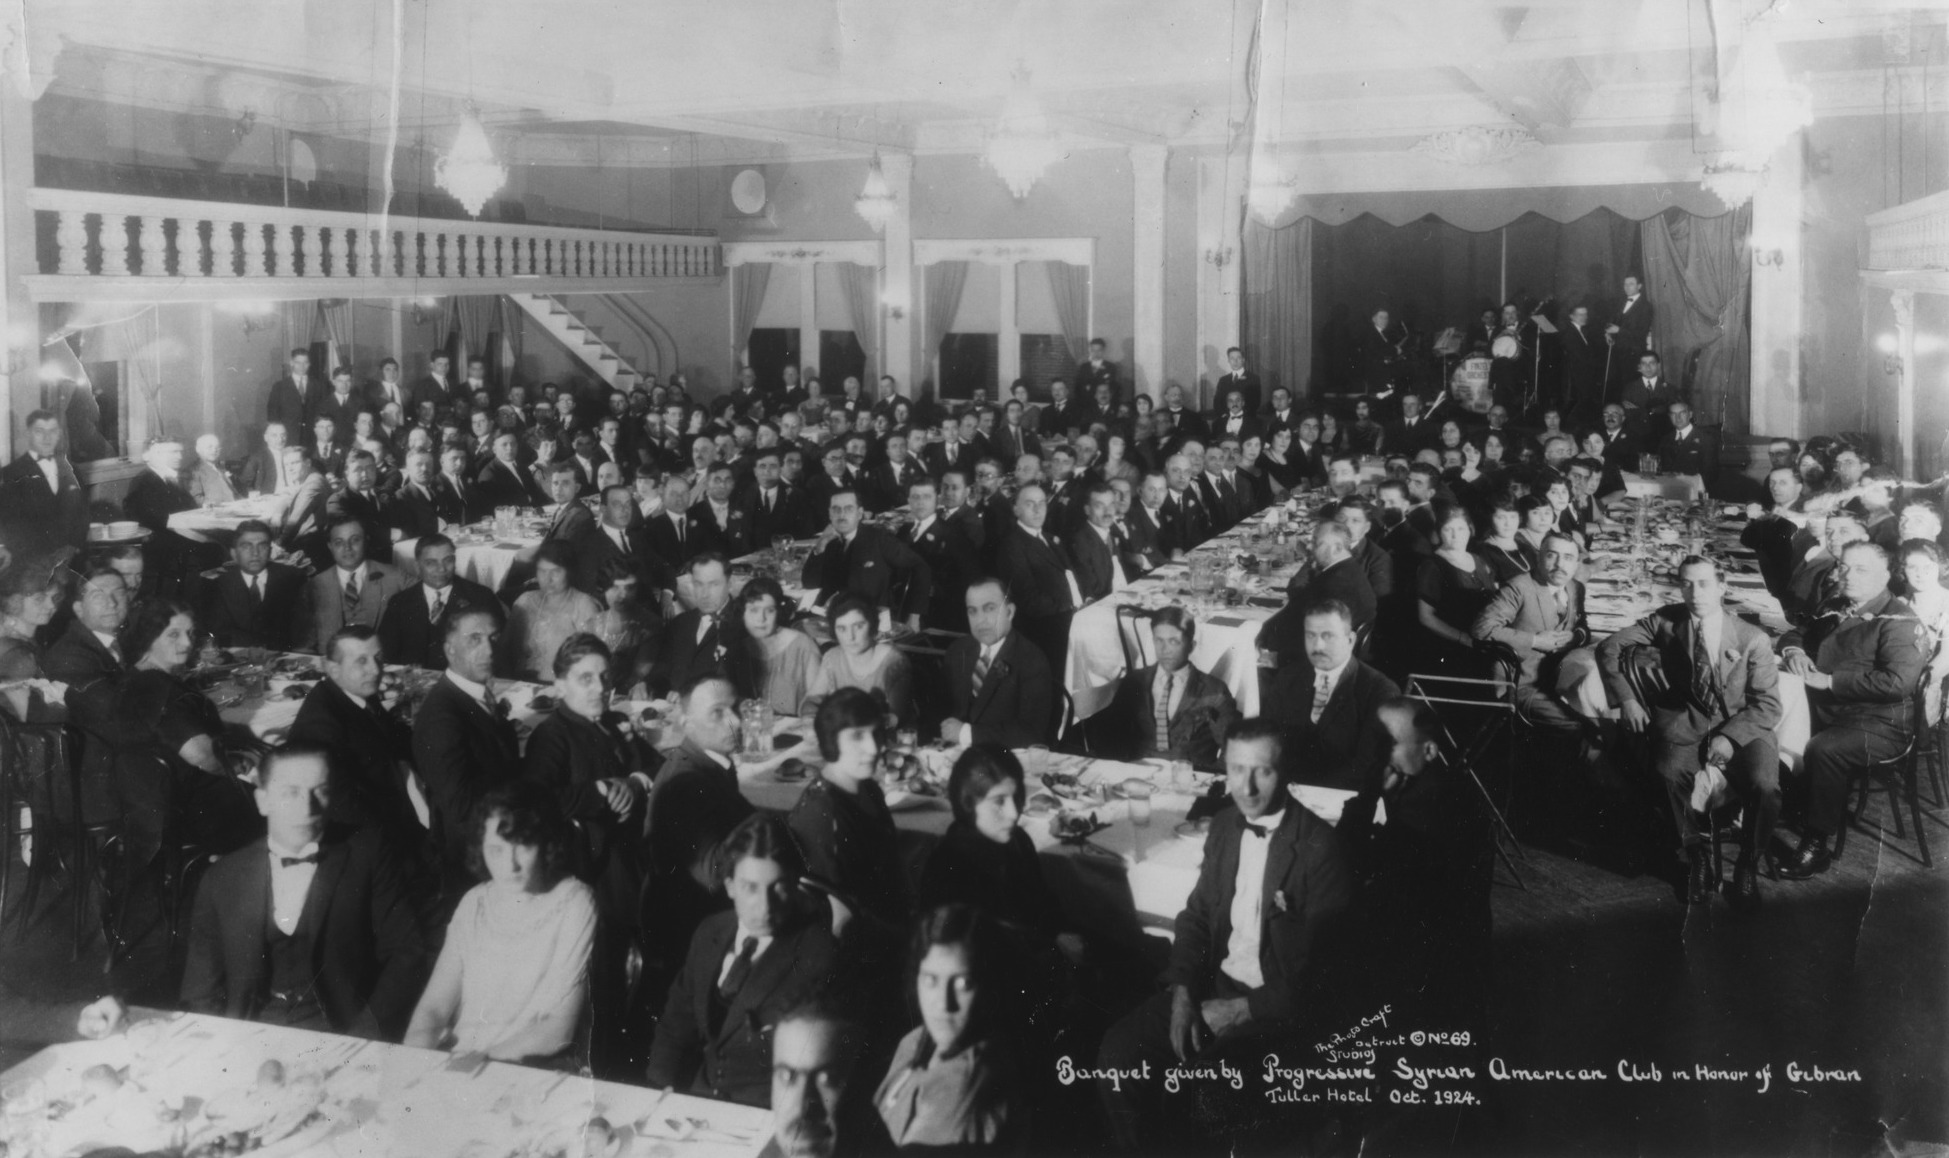 Banquet given by Progressive Syrian American Club in honor of Kahlil Gibran October 1924 Smithsonian Institution